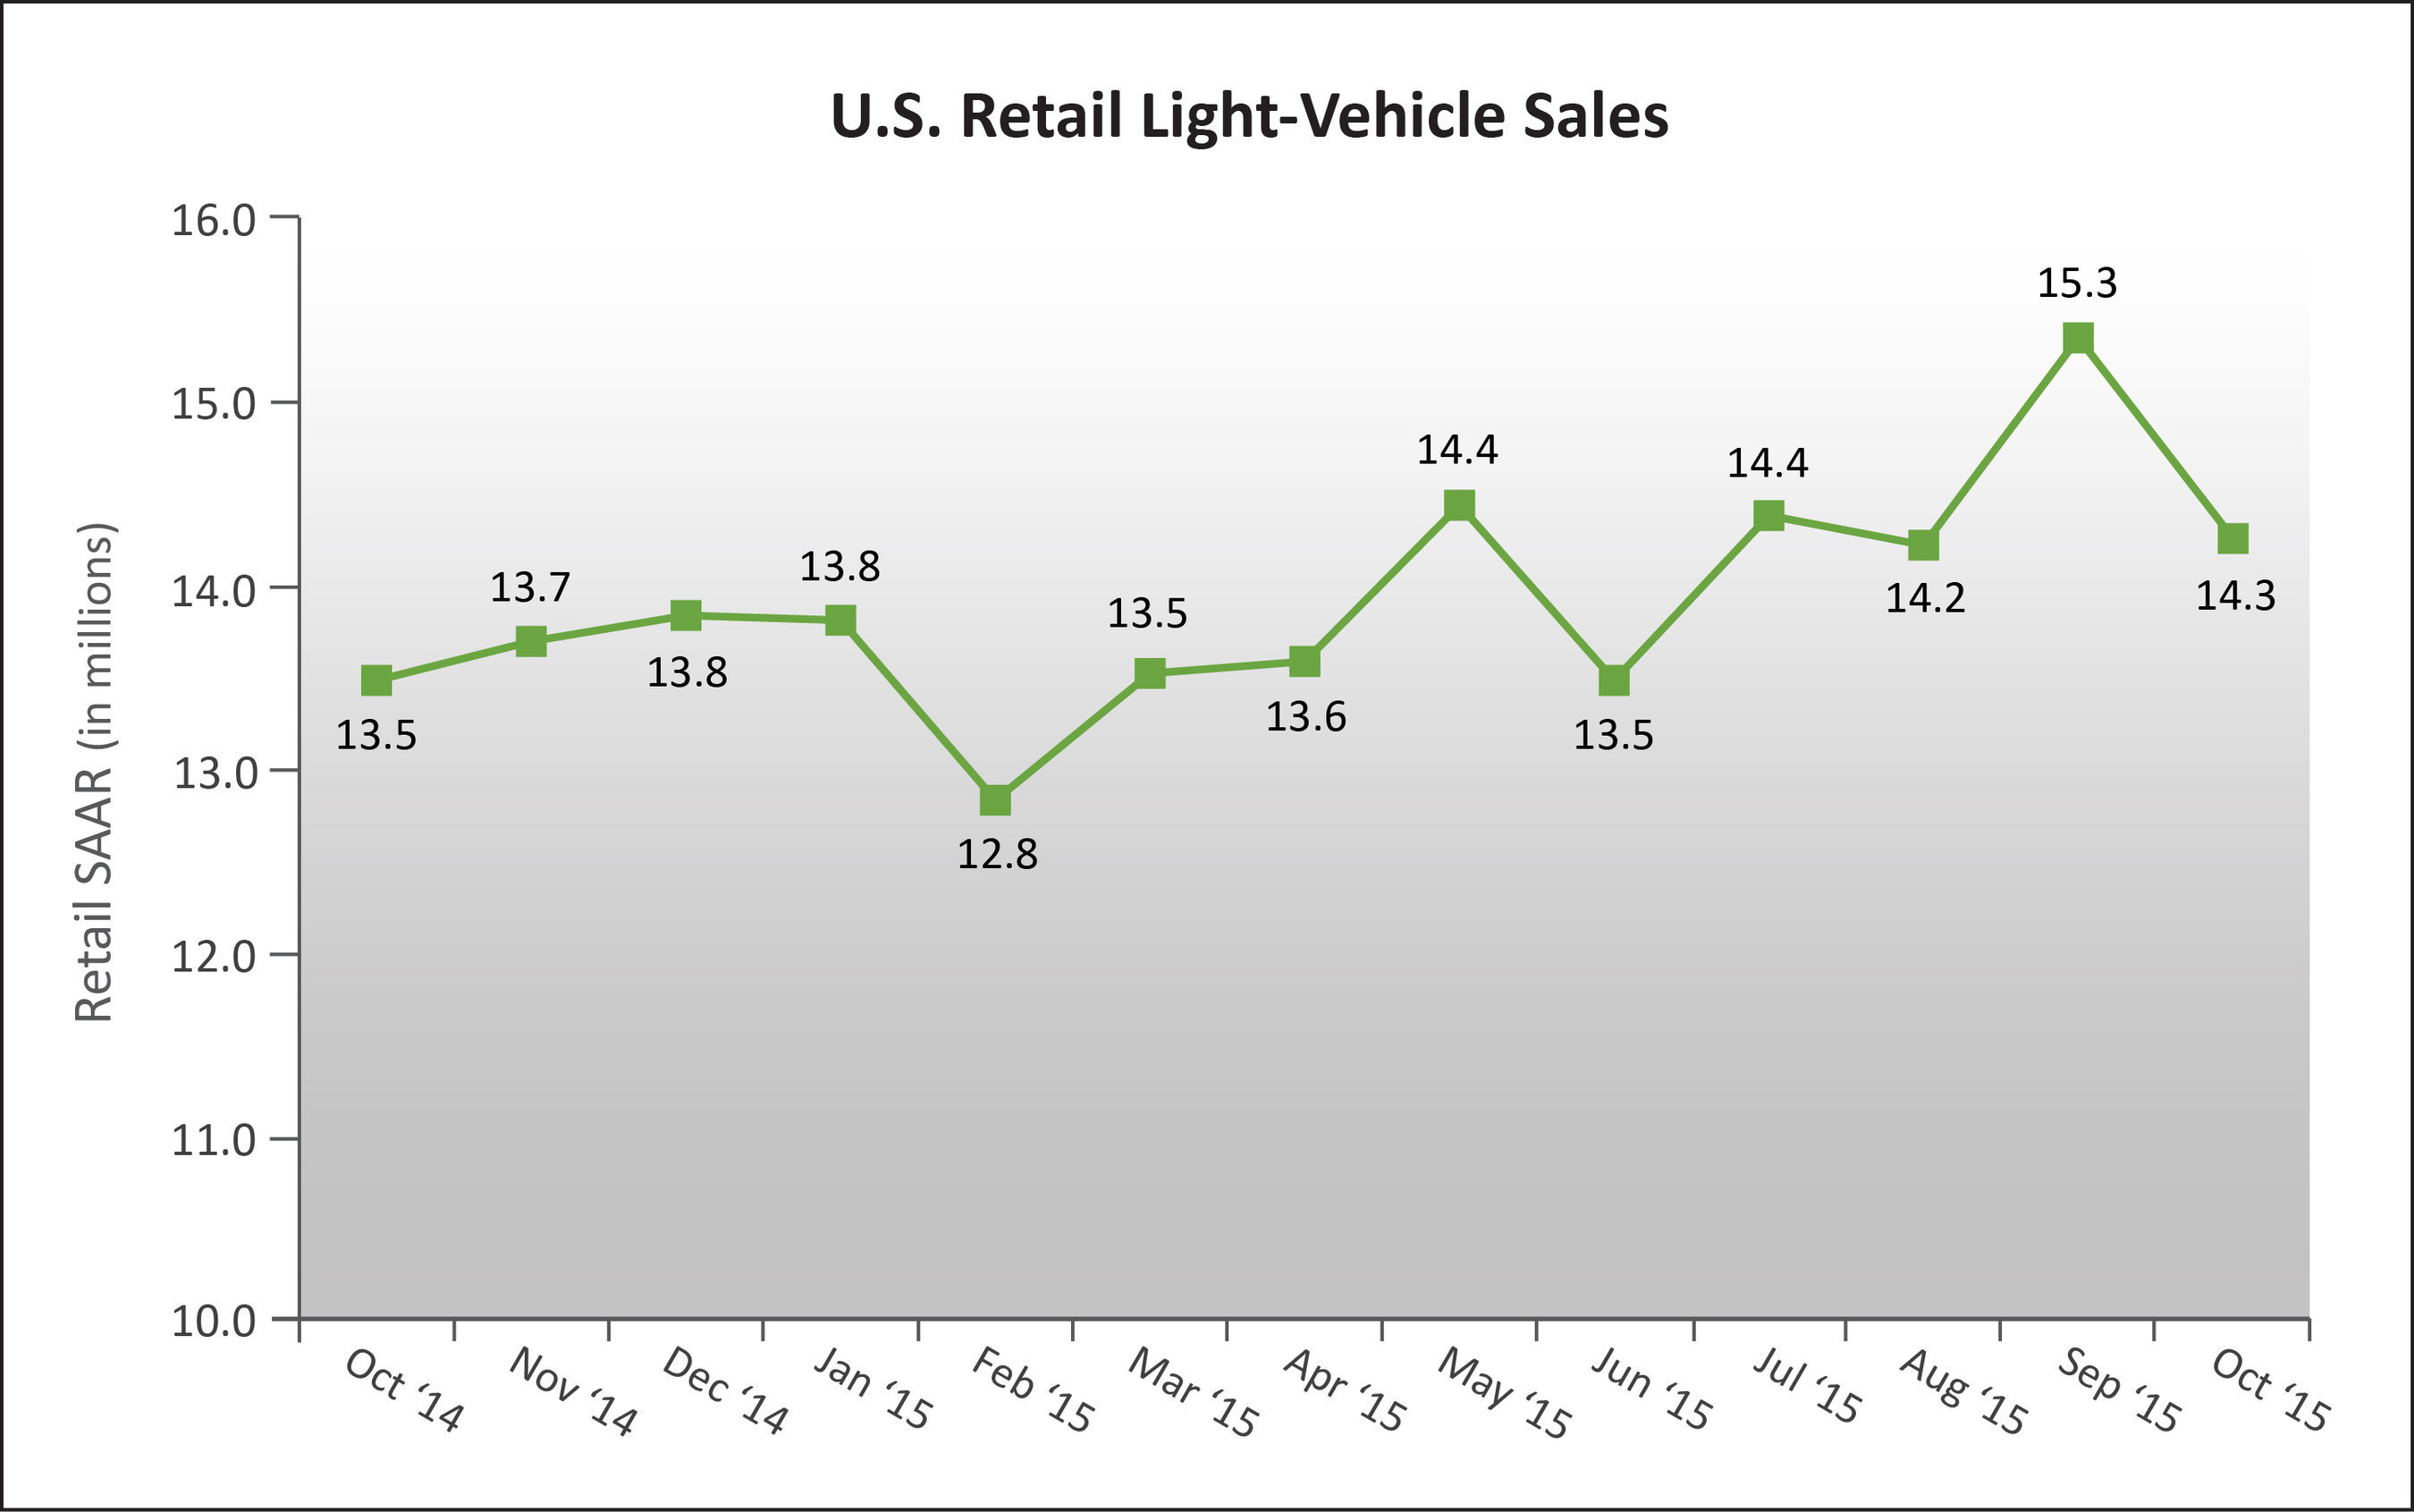 U.S. Retail SAAR-October 2014 to October 2015 (in millions of units)Source: Power Information Network (PIN) from J.D. Power